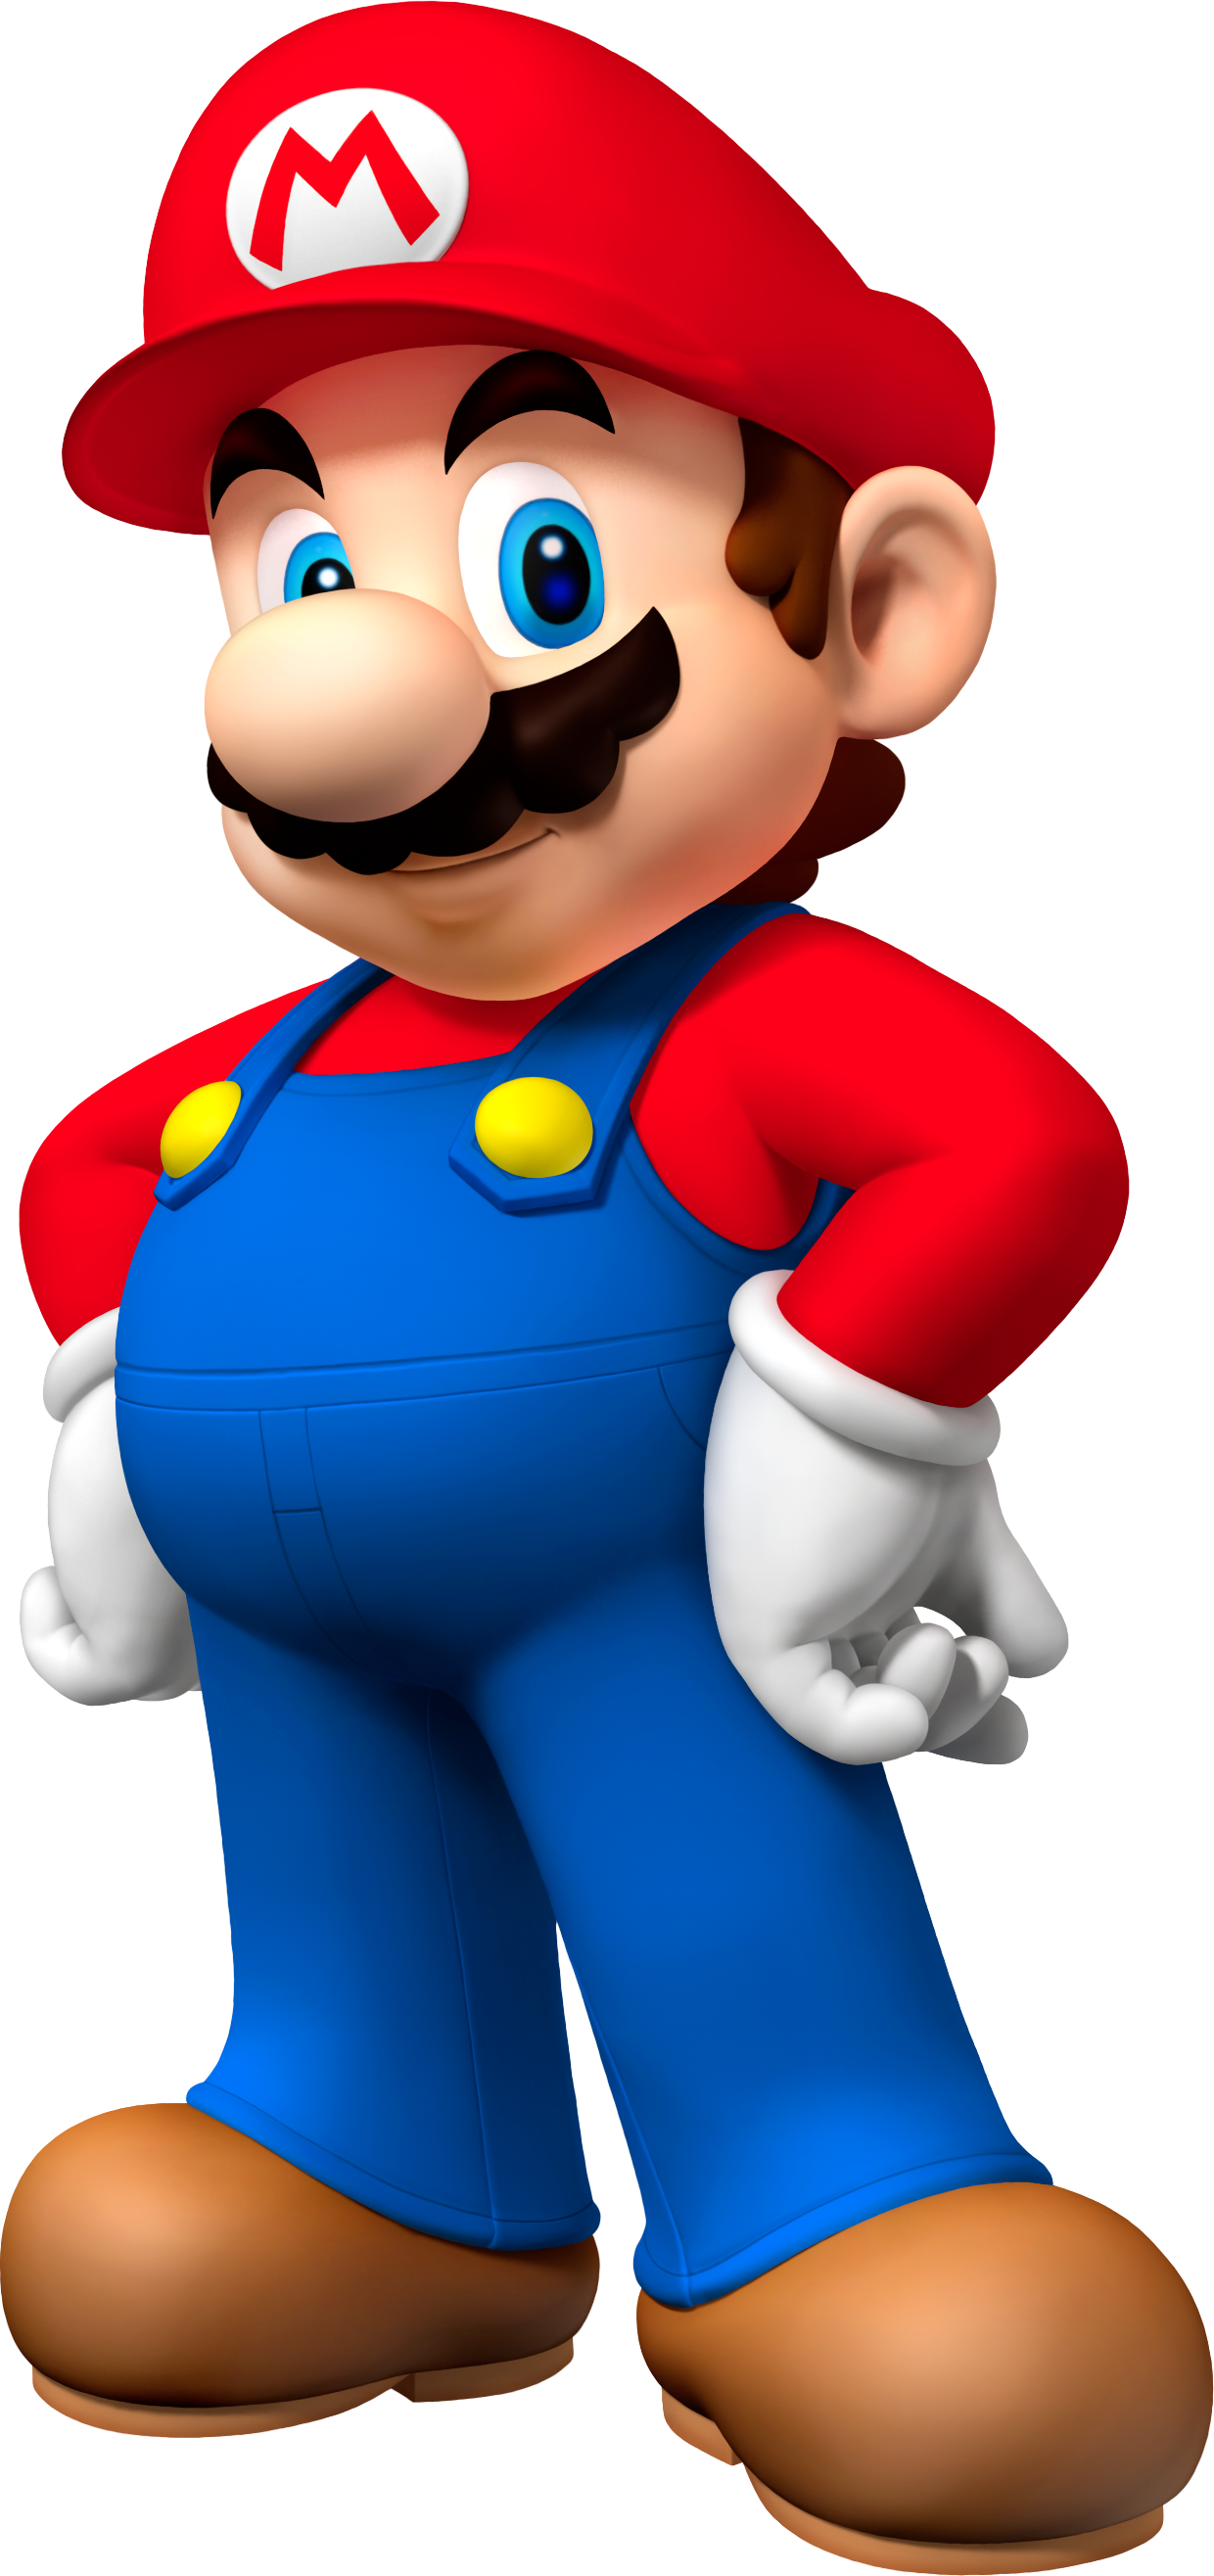 44, August 23, 2014 - Super Mario Character (1240x2631)